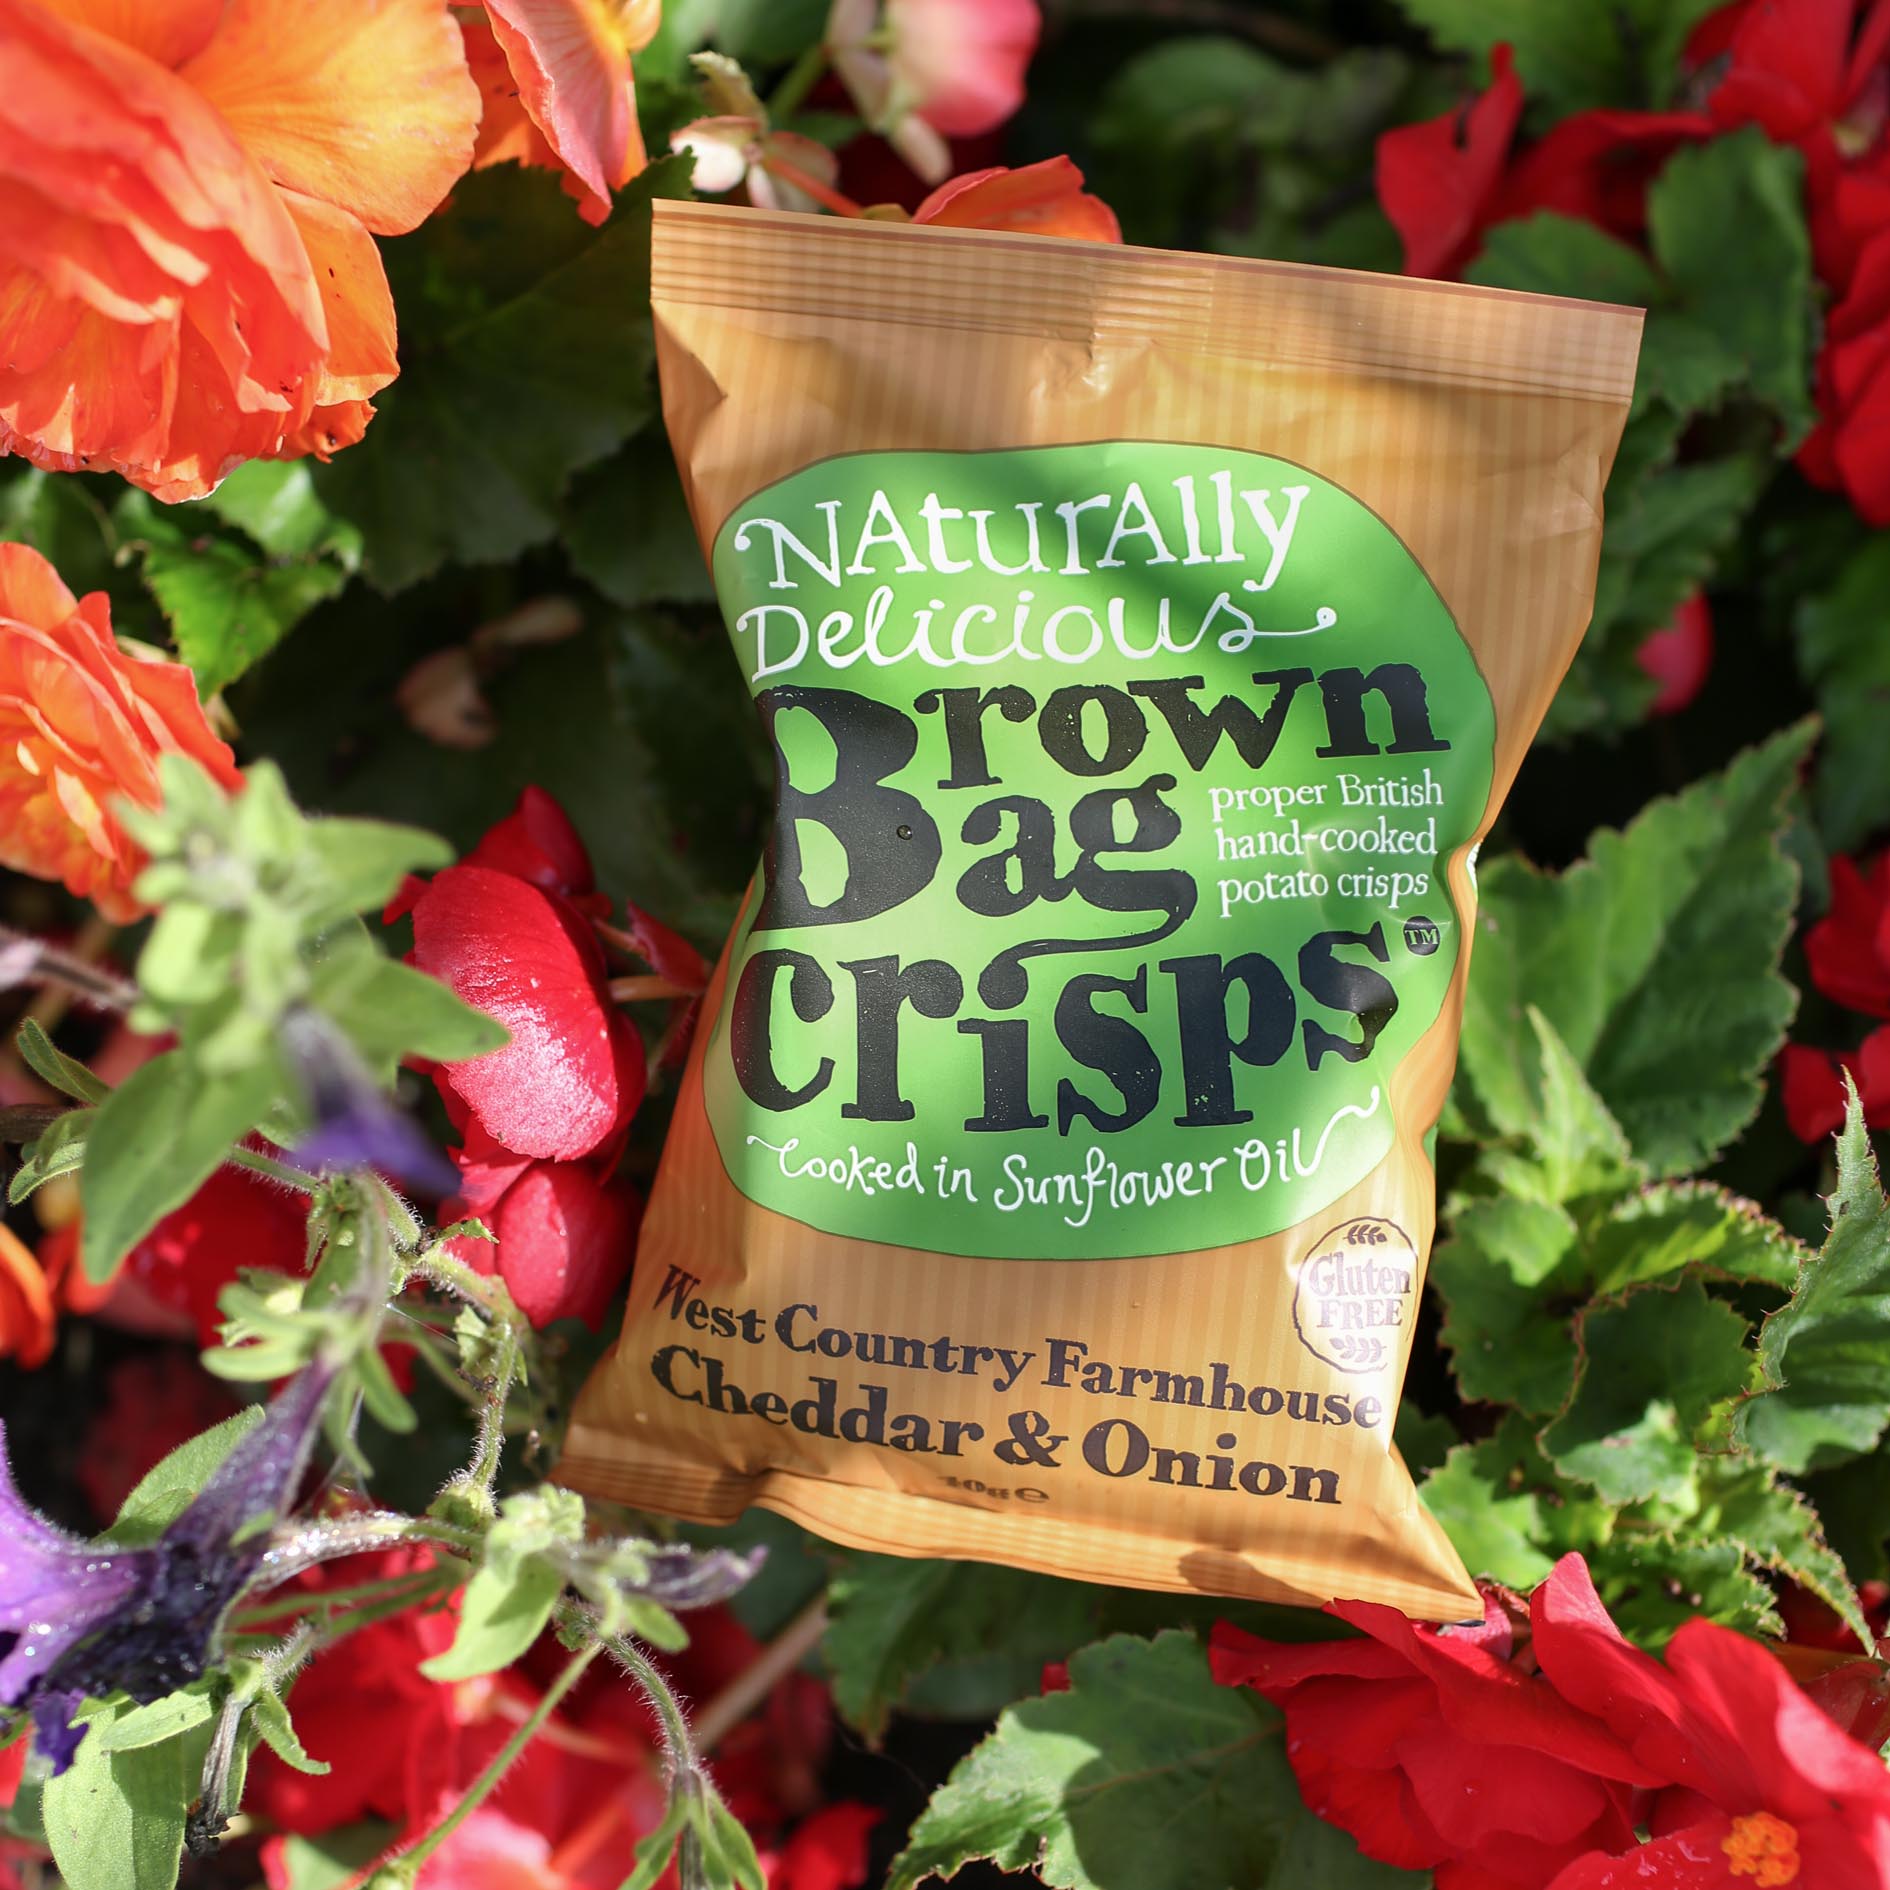 Brown Bag Crisps - West Country Farmhouse Cheddar and Onion